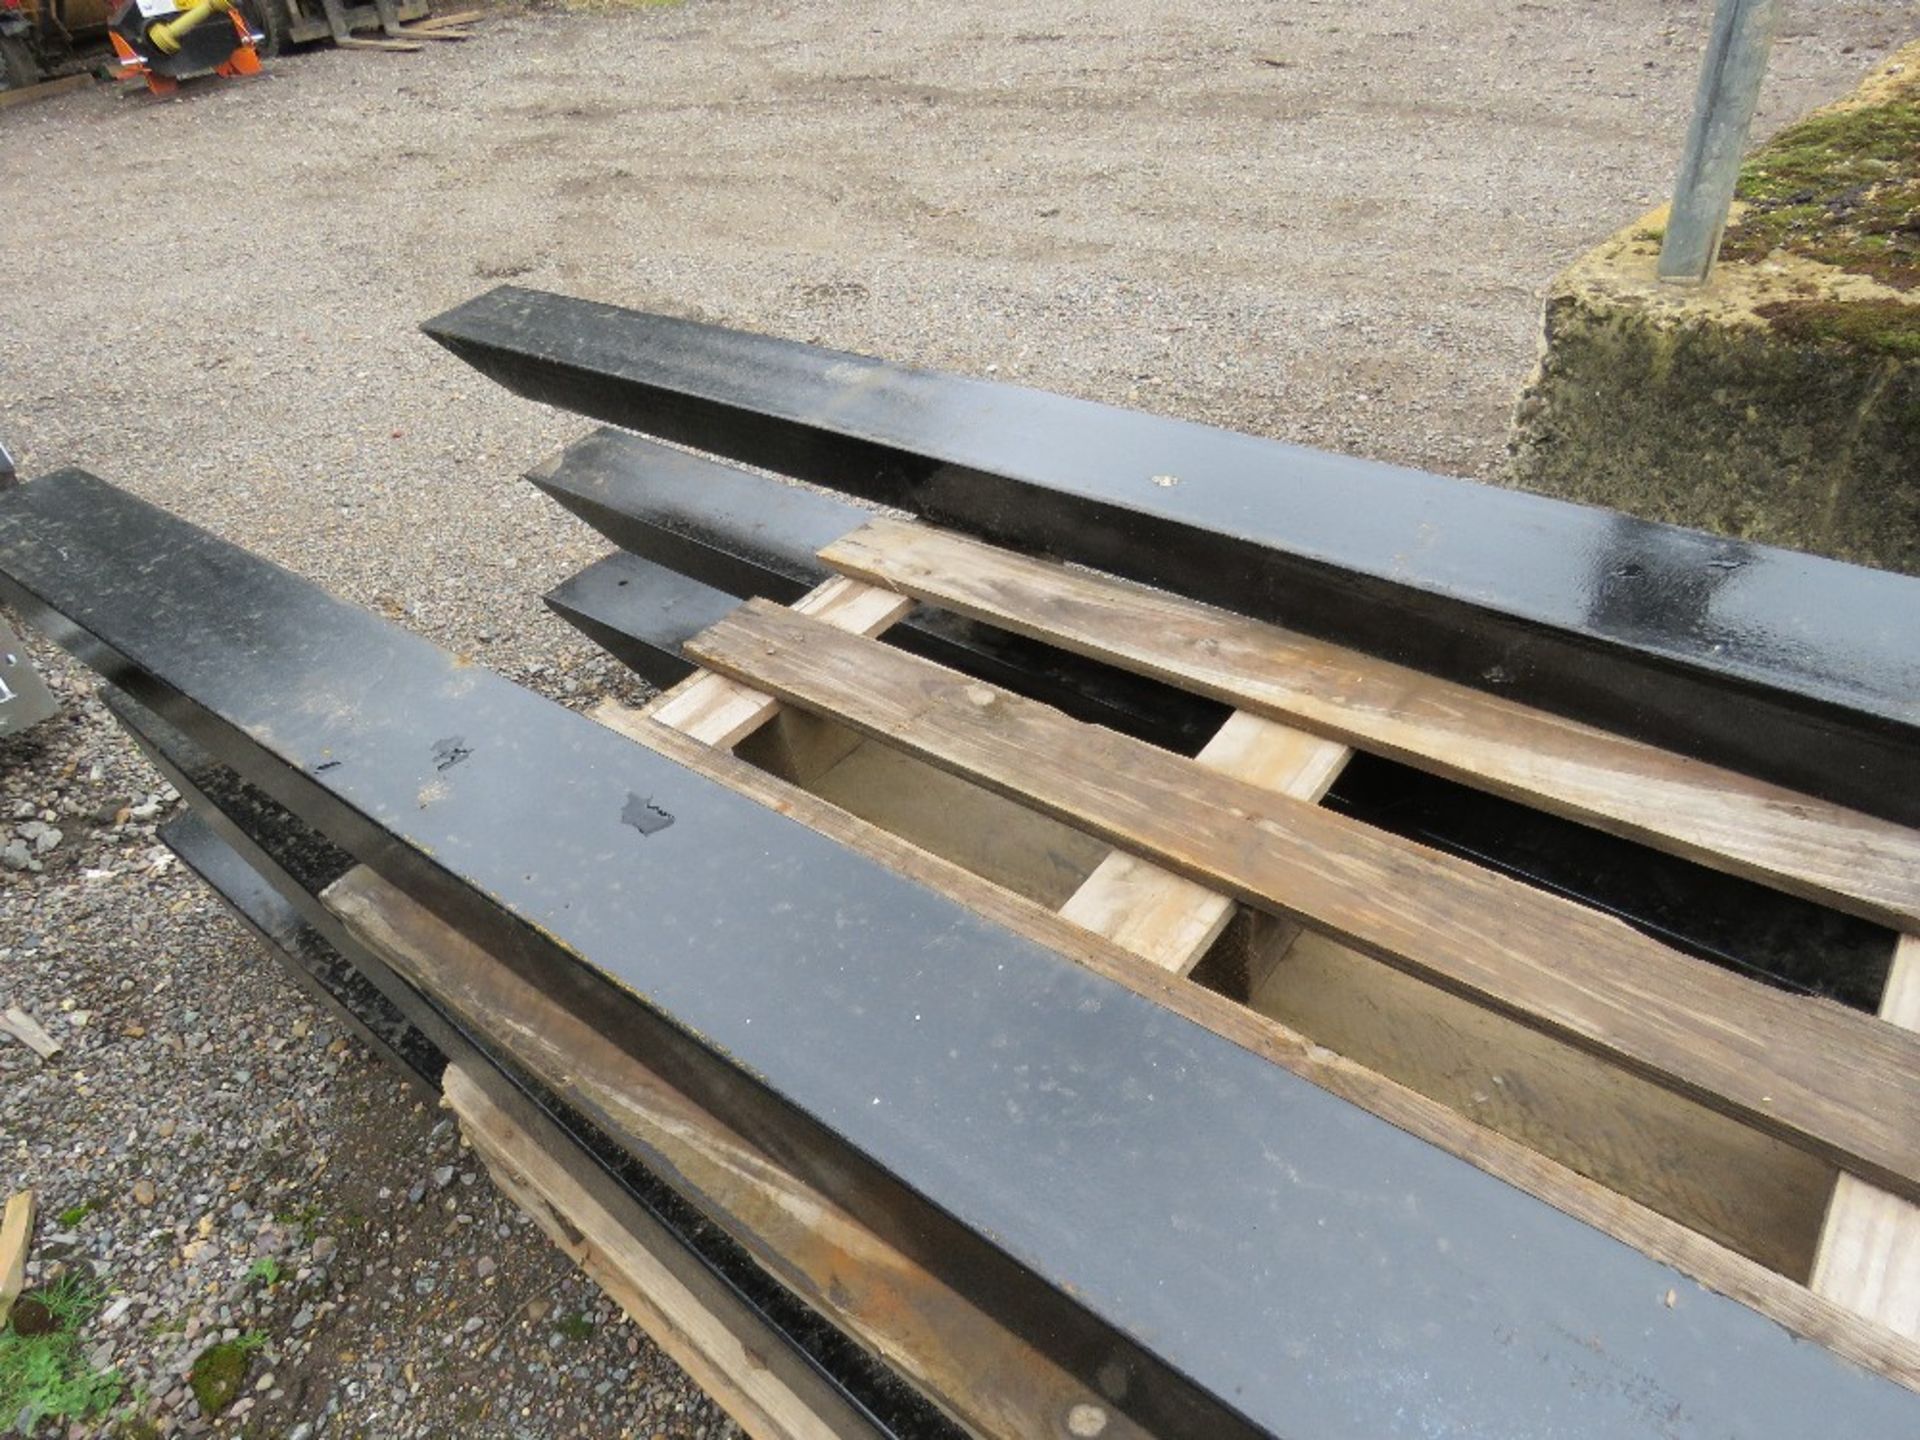 PAIR OF FORKLIFT EXTENSION TINES / SLEEVES 8FT WIDE X 6" WIDTH APPROX, WITH LOCKING PINS. - Image 3 of 3